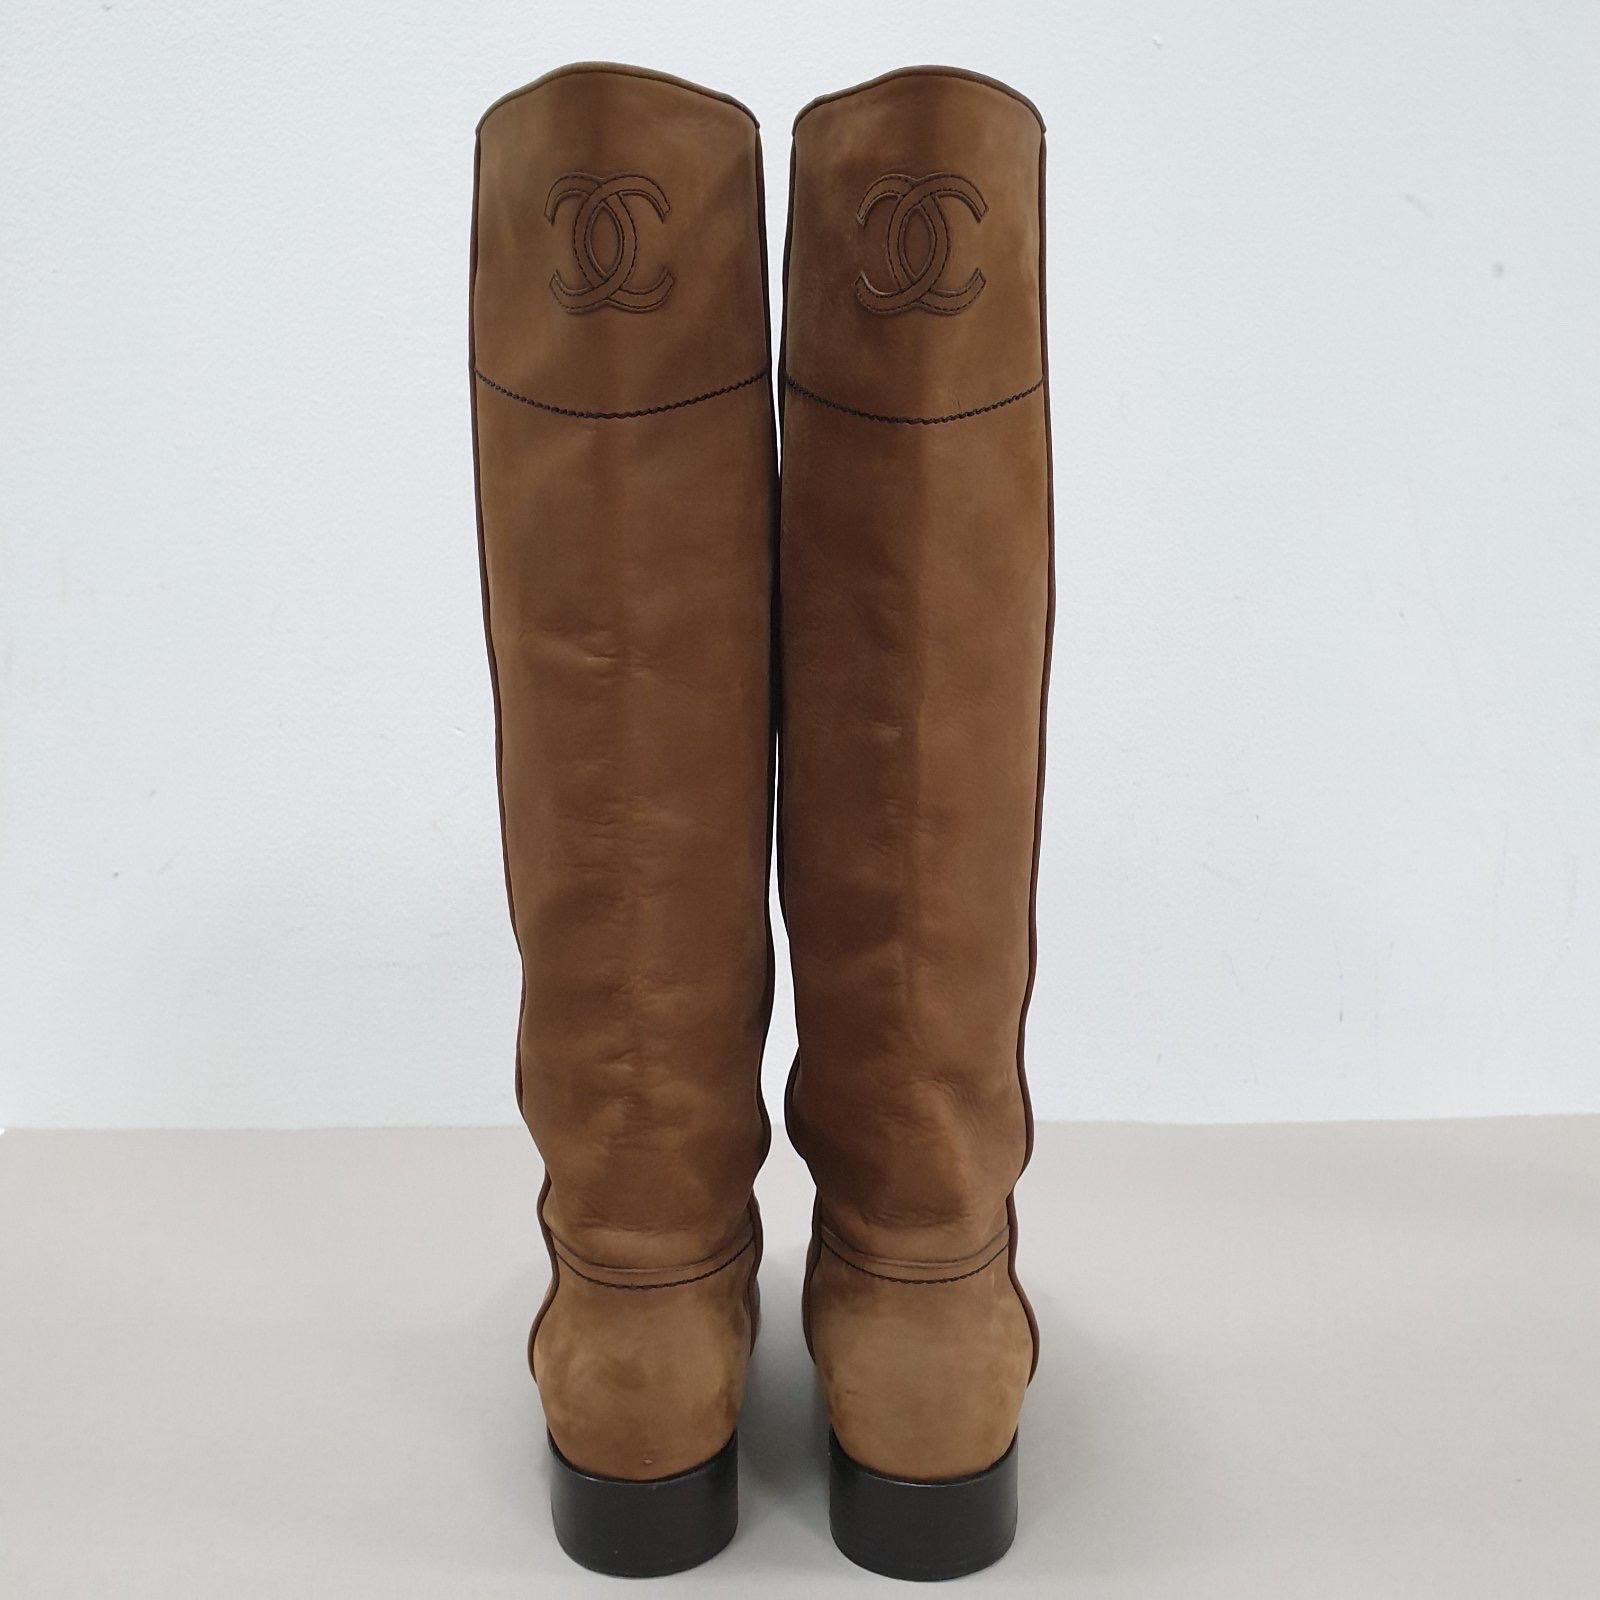  Chanel 2015 Interlocking CC Logo Riding Boots. 
With their timeless design and iconic logo, these boots are a statement of your impeccable taste and a versatile addition to your wardrobe. 
Experience the luxury, sophistication, and enduring appeal